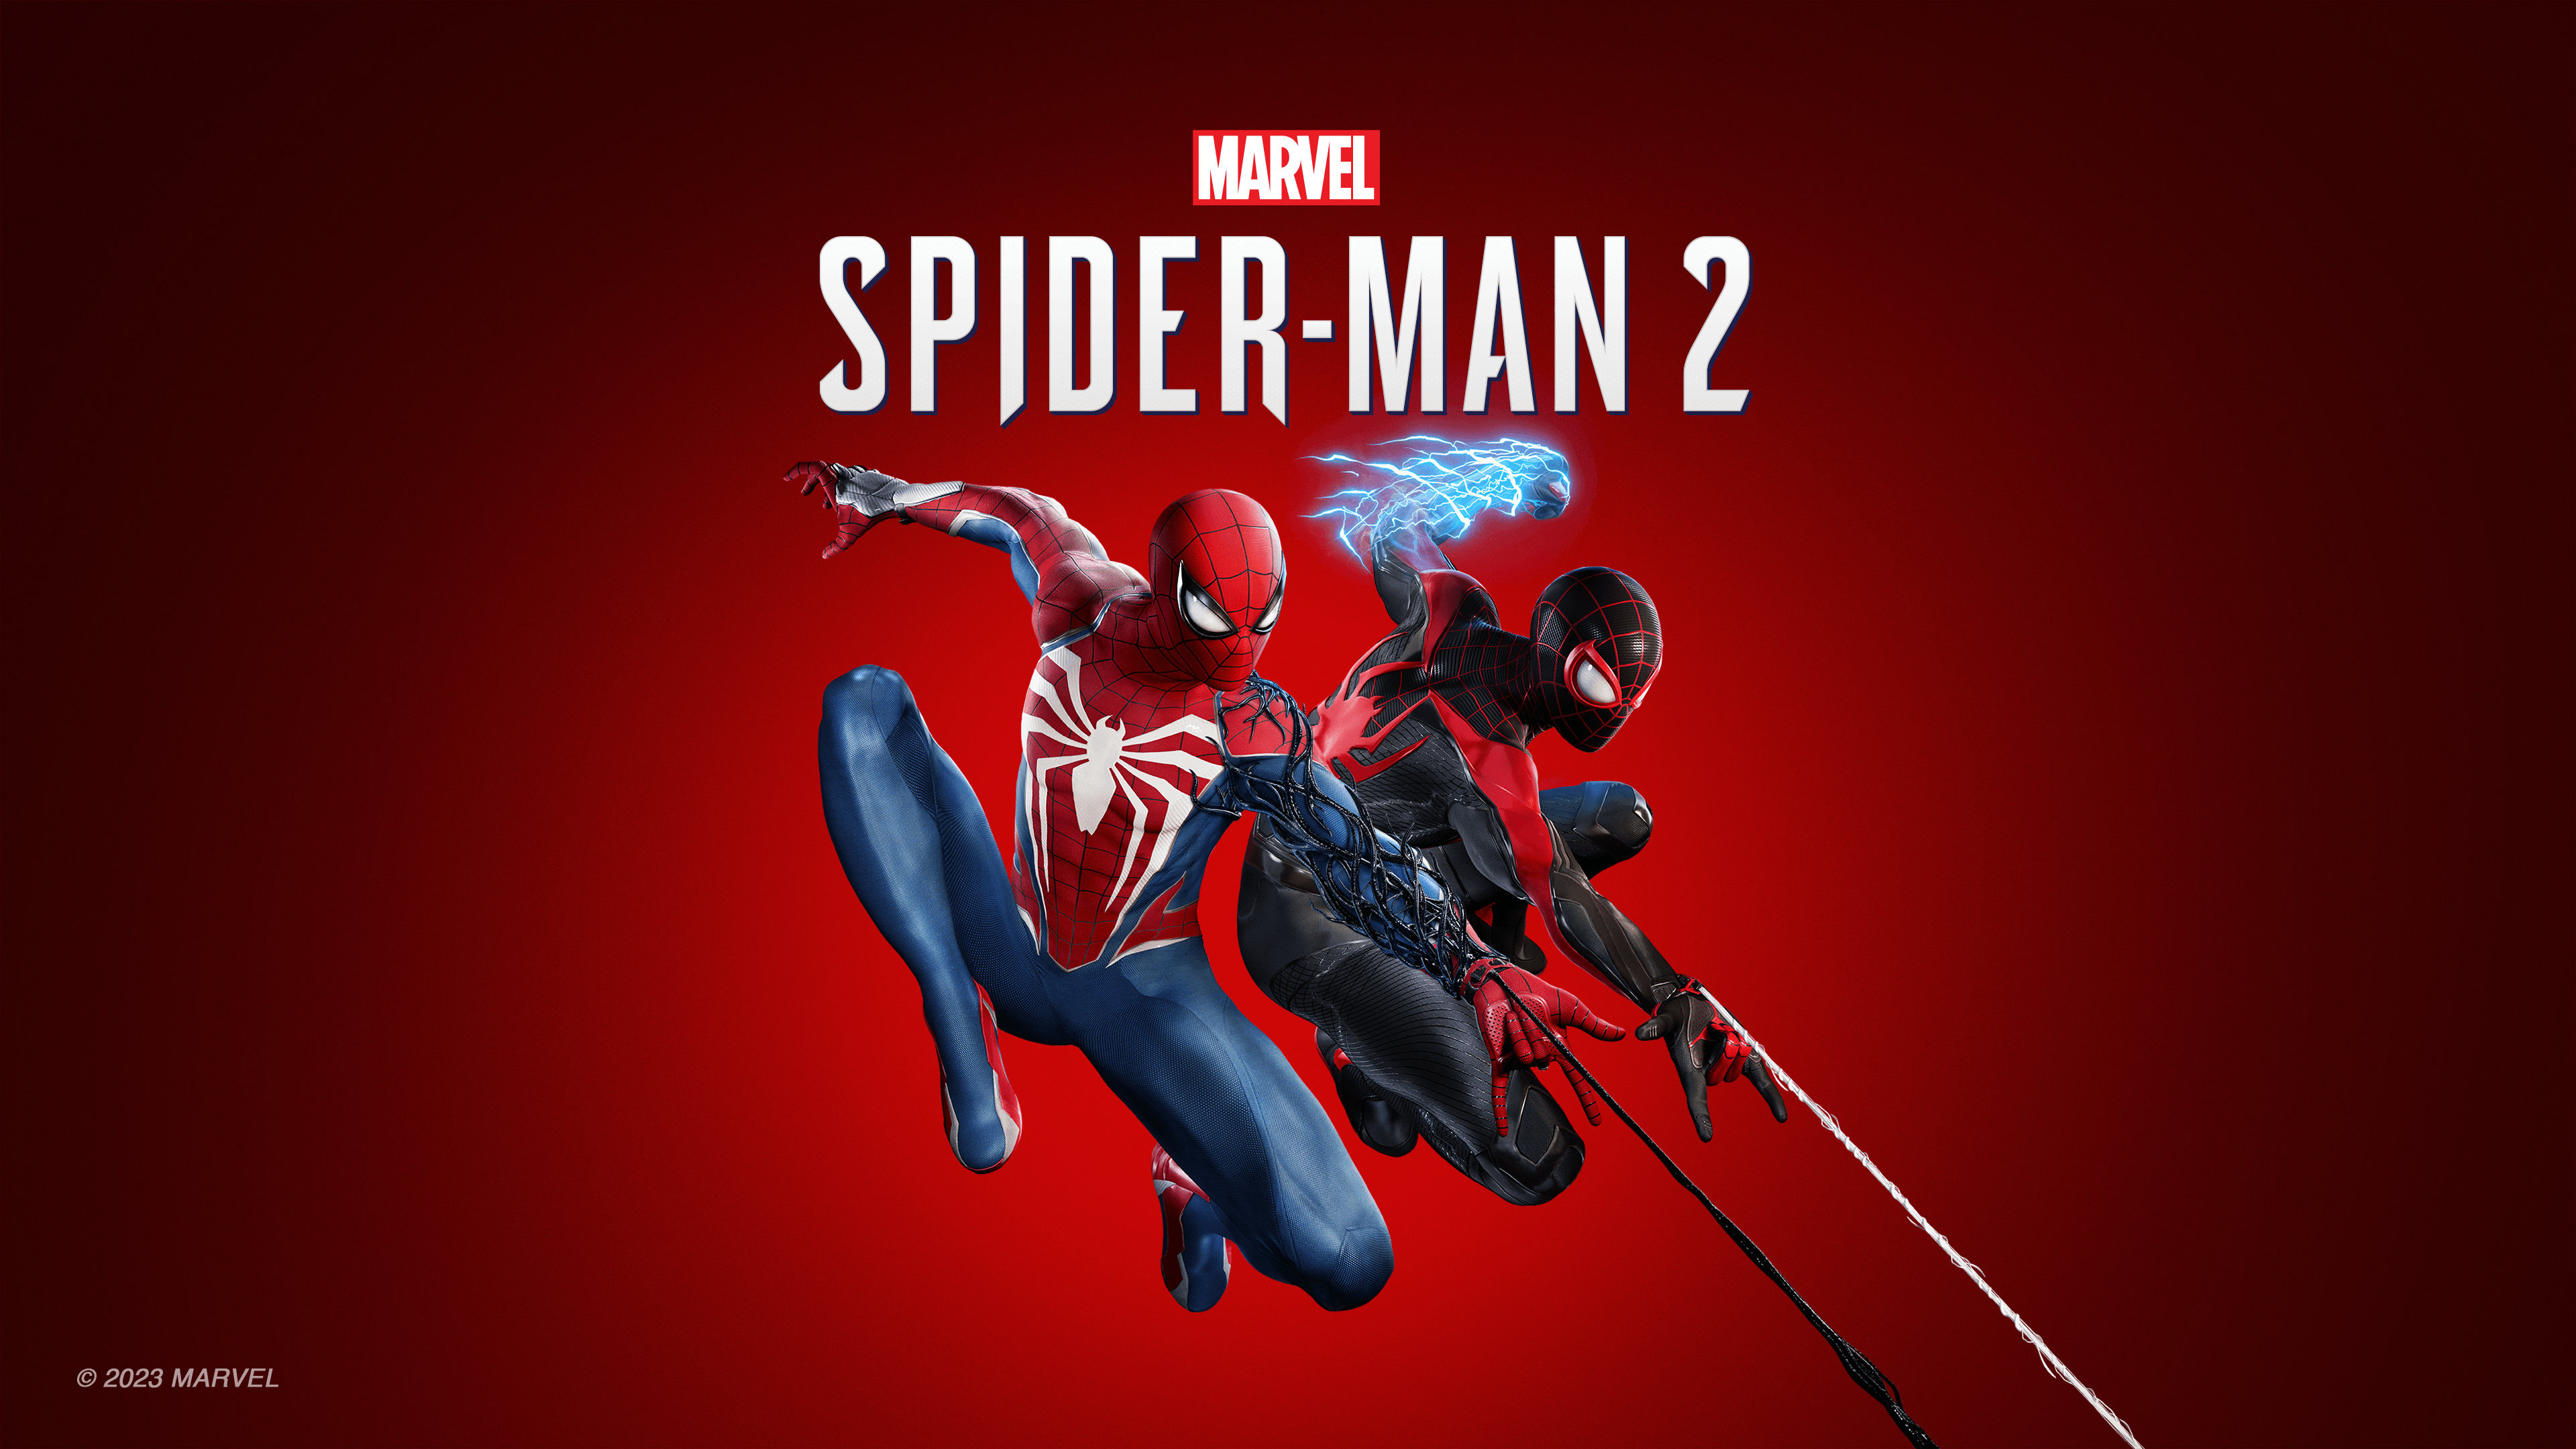  Marvel's Spider-Man: Miles Morales Ultimate Edition -  PlayStation 5 : Solutions 2 Go Inc: Video Games